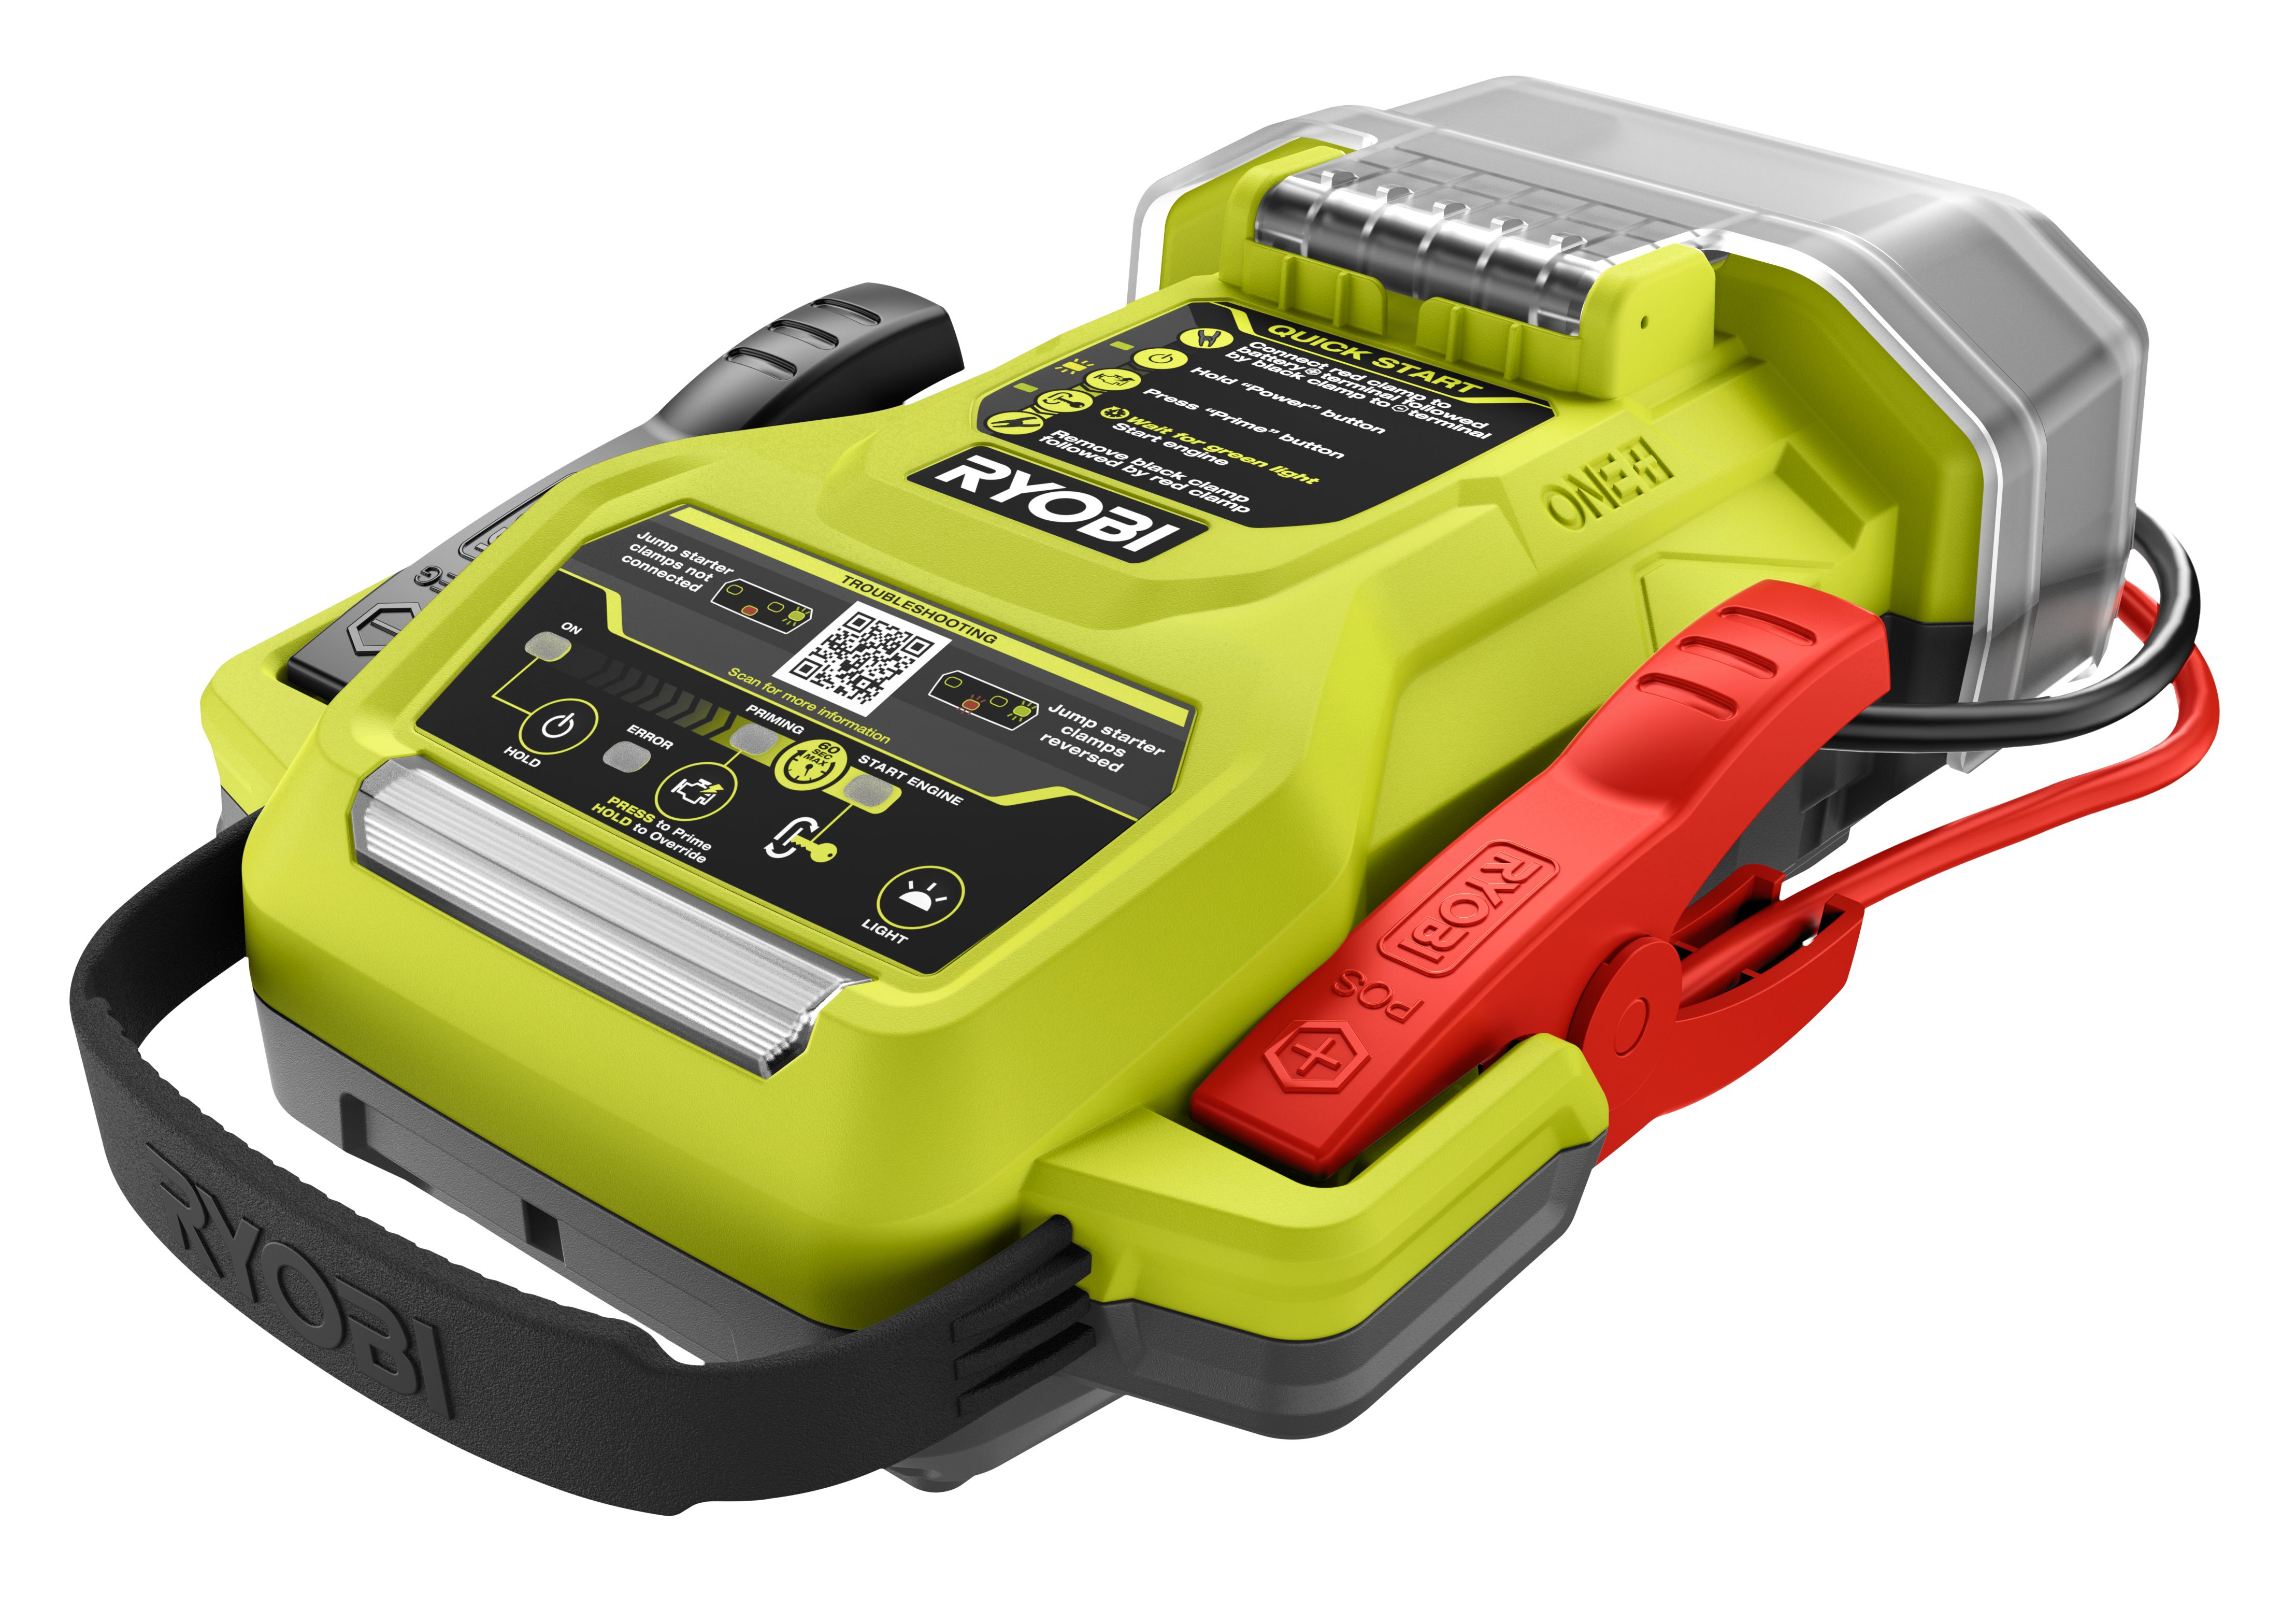 Best 12v Battery Charger to Jump Start Your Car's Battery Quickly